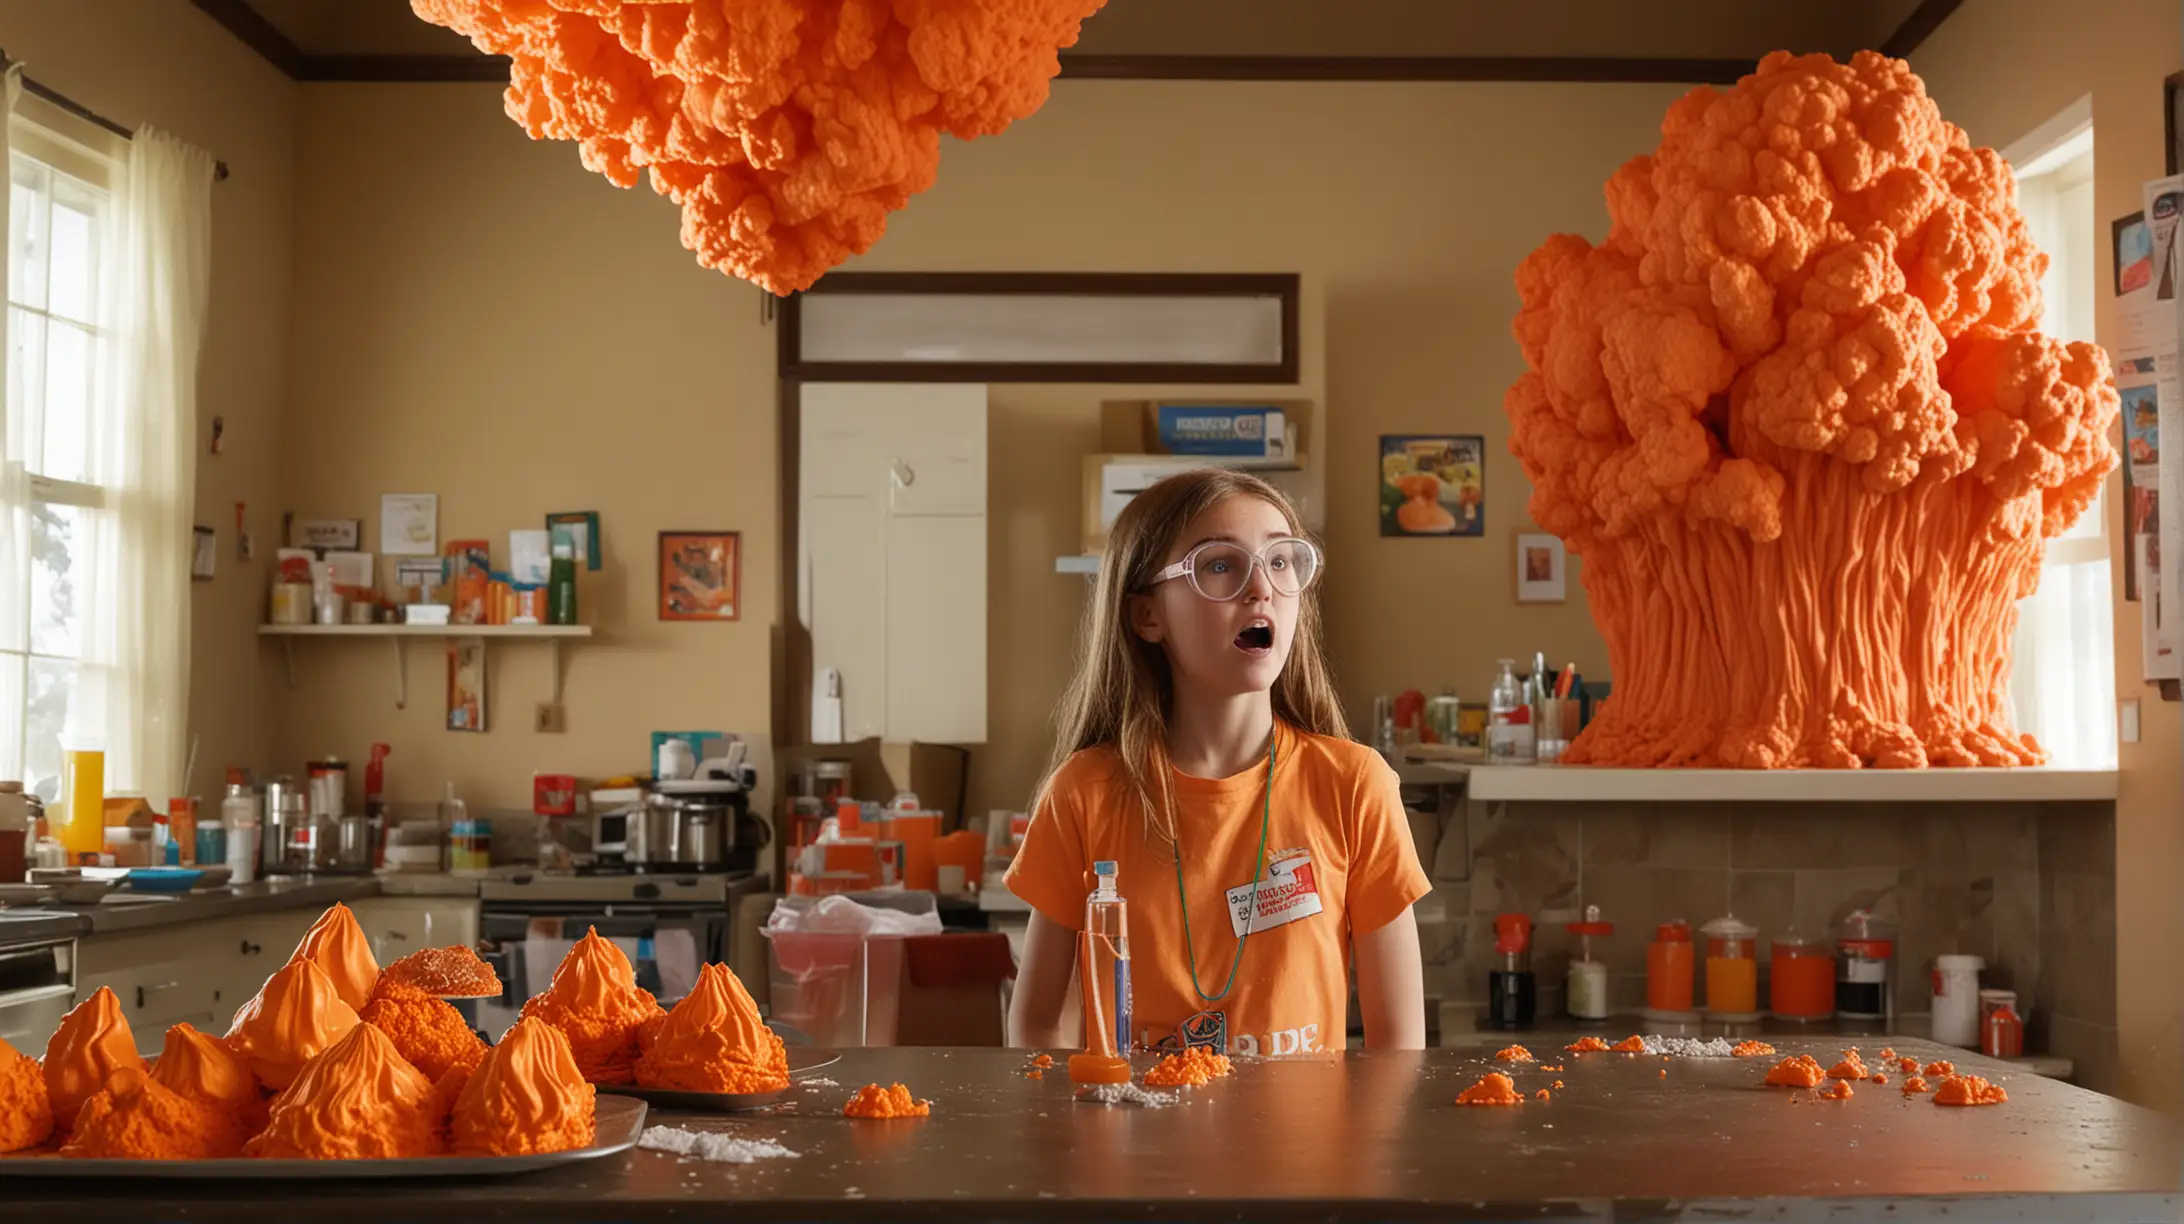 Interior, living room, afternoon light, 12-year-old girl standing in front of a freshly erupted science fair volcano, three feet tall. Orange foam cakes her clothes, the counter, stovetop and the ceiling. She blinks with wonder through lab glasses. 